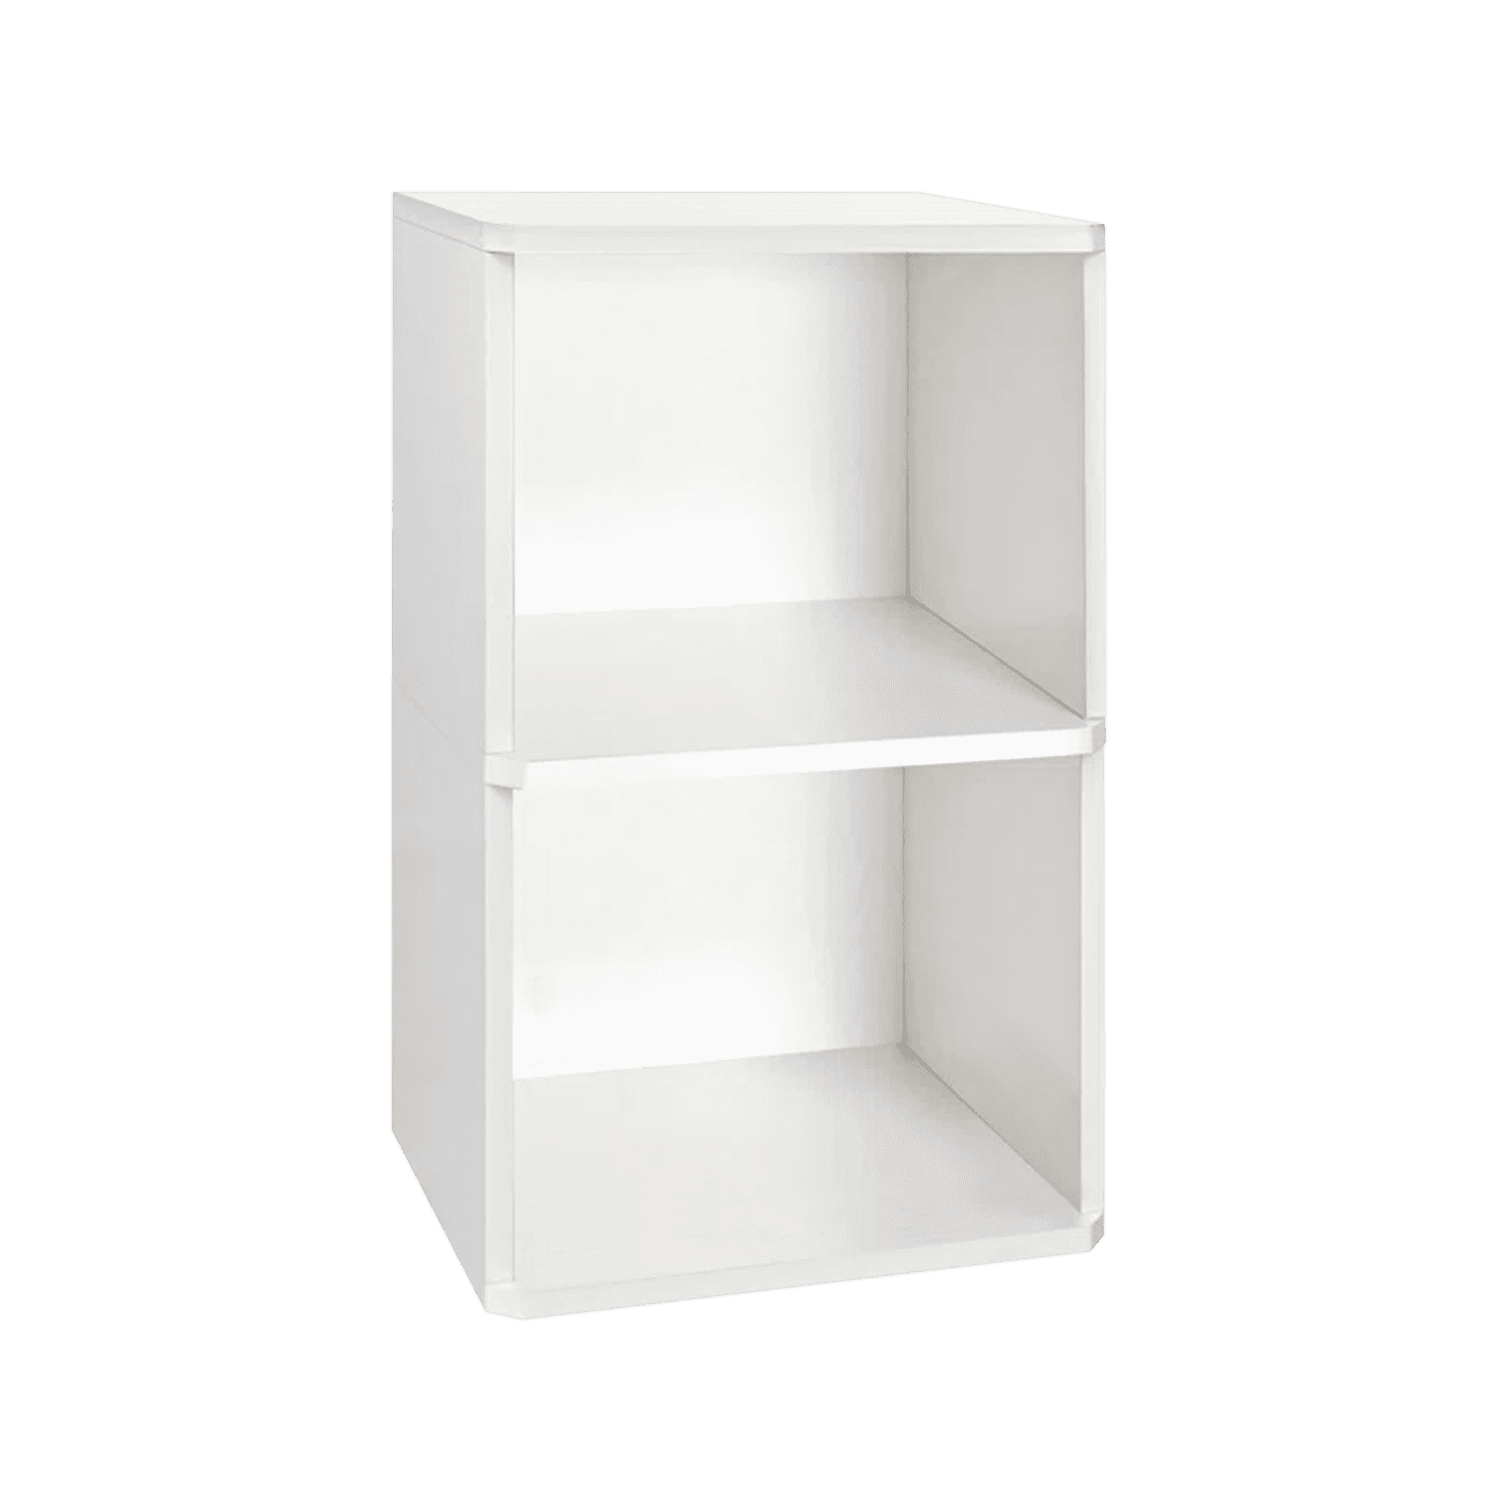 https://cdn.apartmenttherapy.info/image/upload/v1690818137/at/Org%20Awards%202023/products/bellwood-cube-media-shelves.png